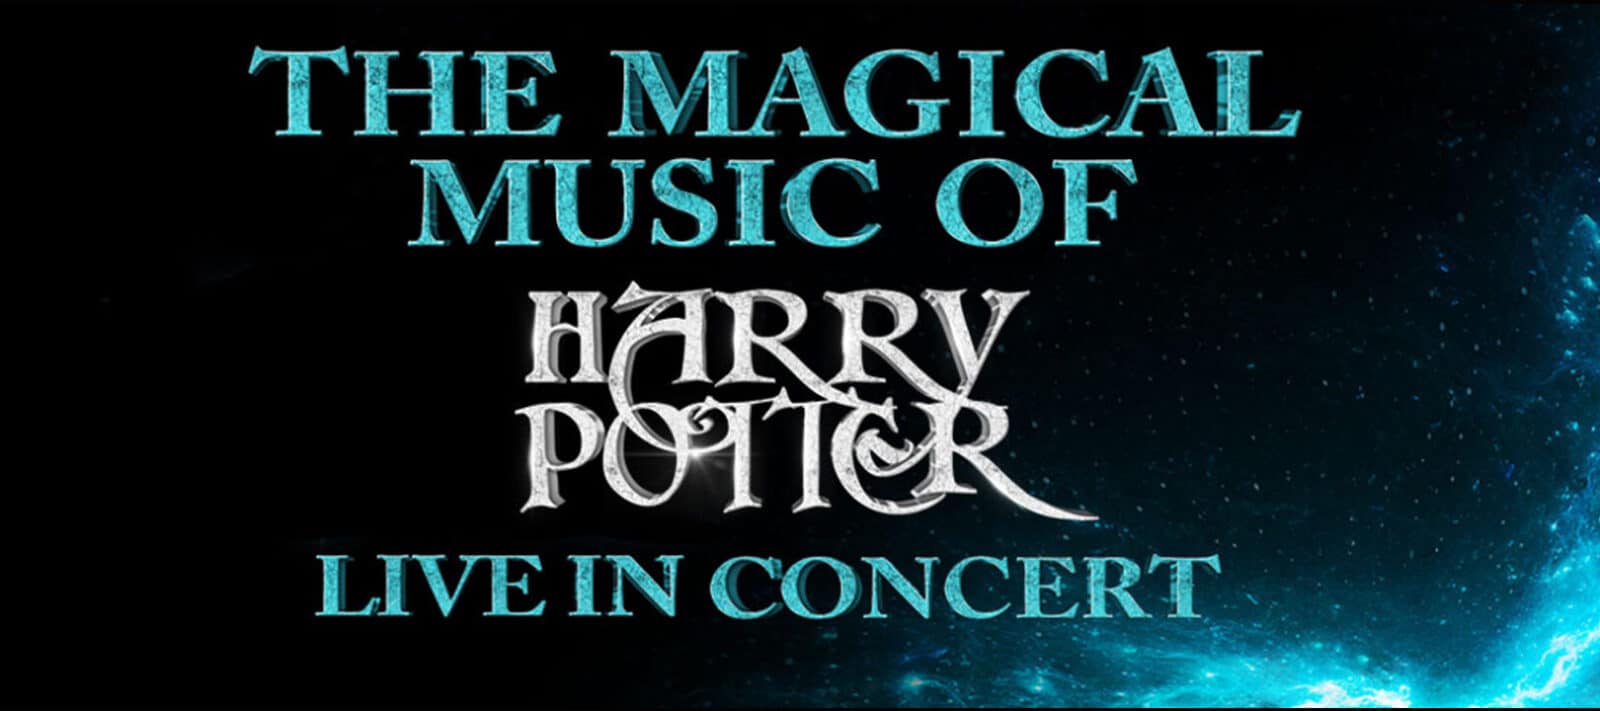 The Magical Music of Harry Potter Live in Concert